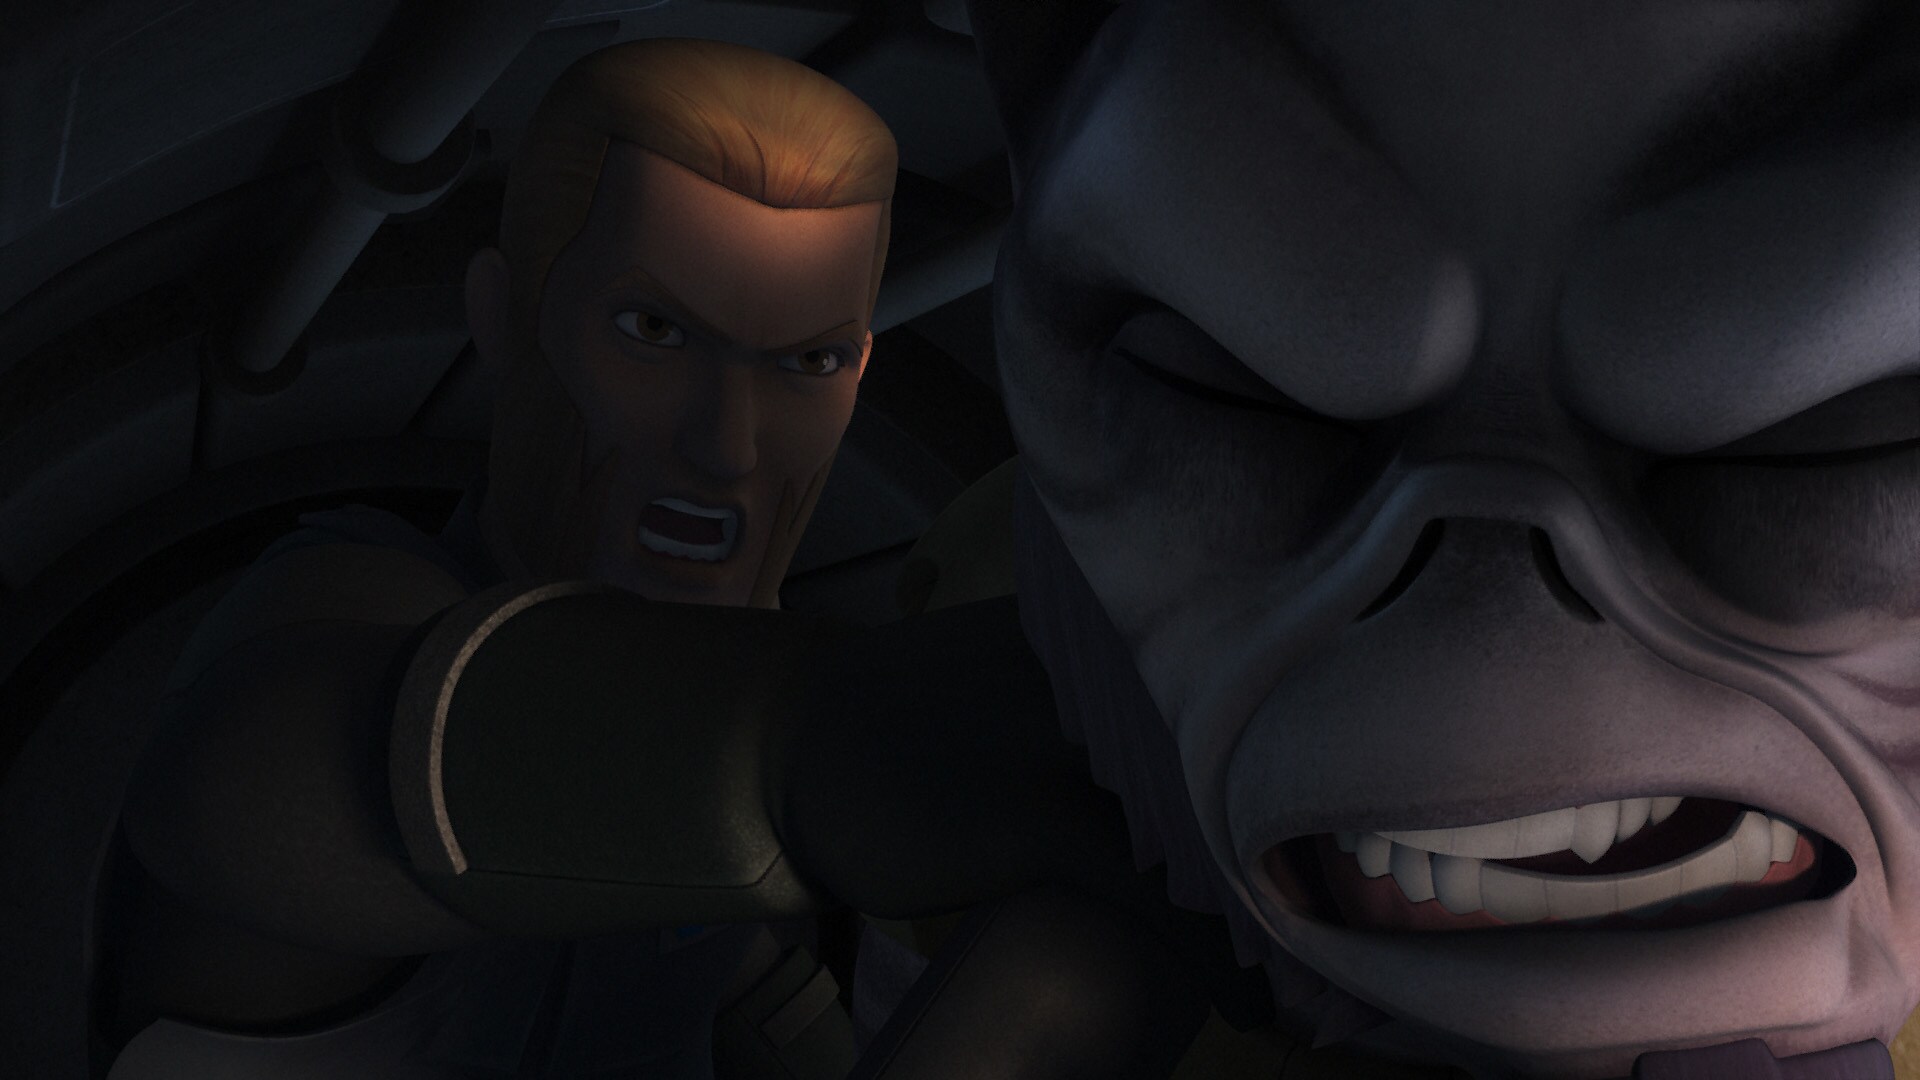 But he's not alone. Kallus follows Zeb inside, and the two battle as the pod zooms toward Geonosis.